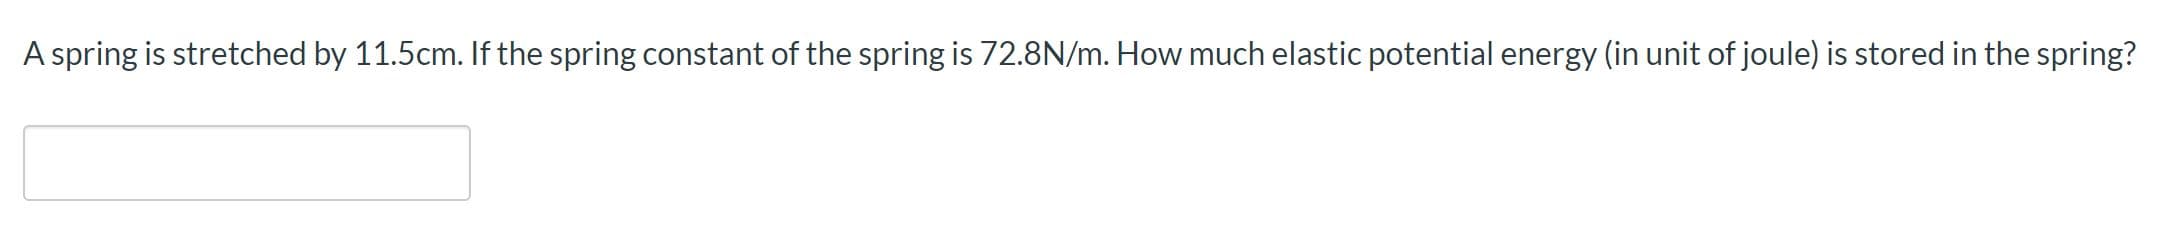 A spring is stretched by 11.5cm. If the spring constant of the spring is 72.8N/m. How much elastic potential energy (in unit of joule) is stored in the spring?
